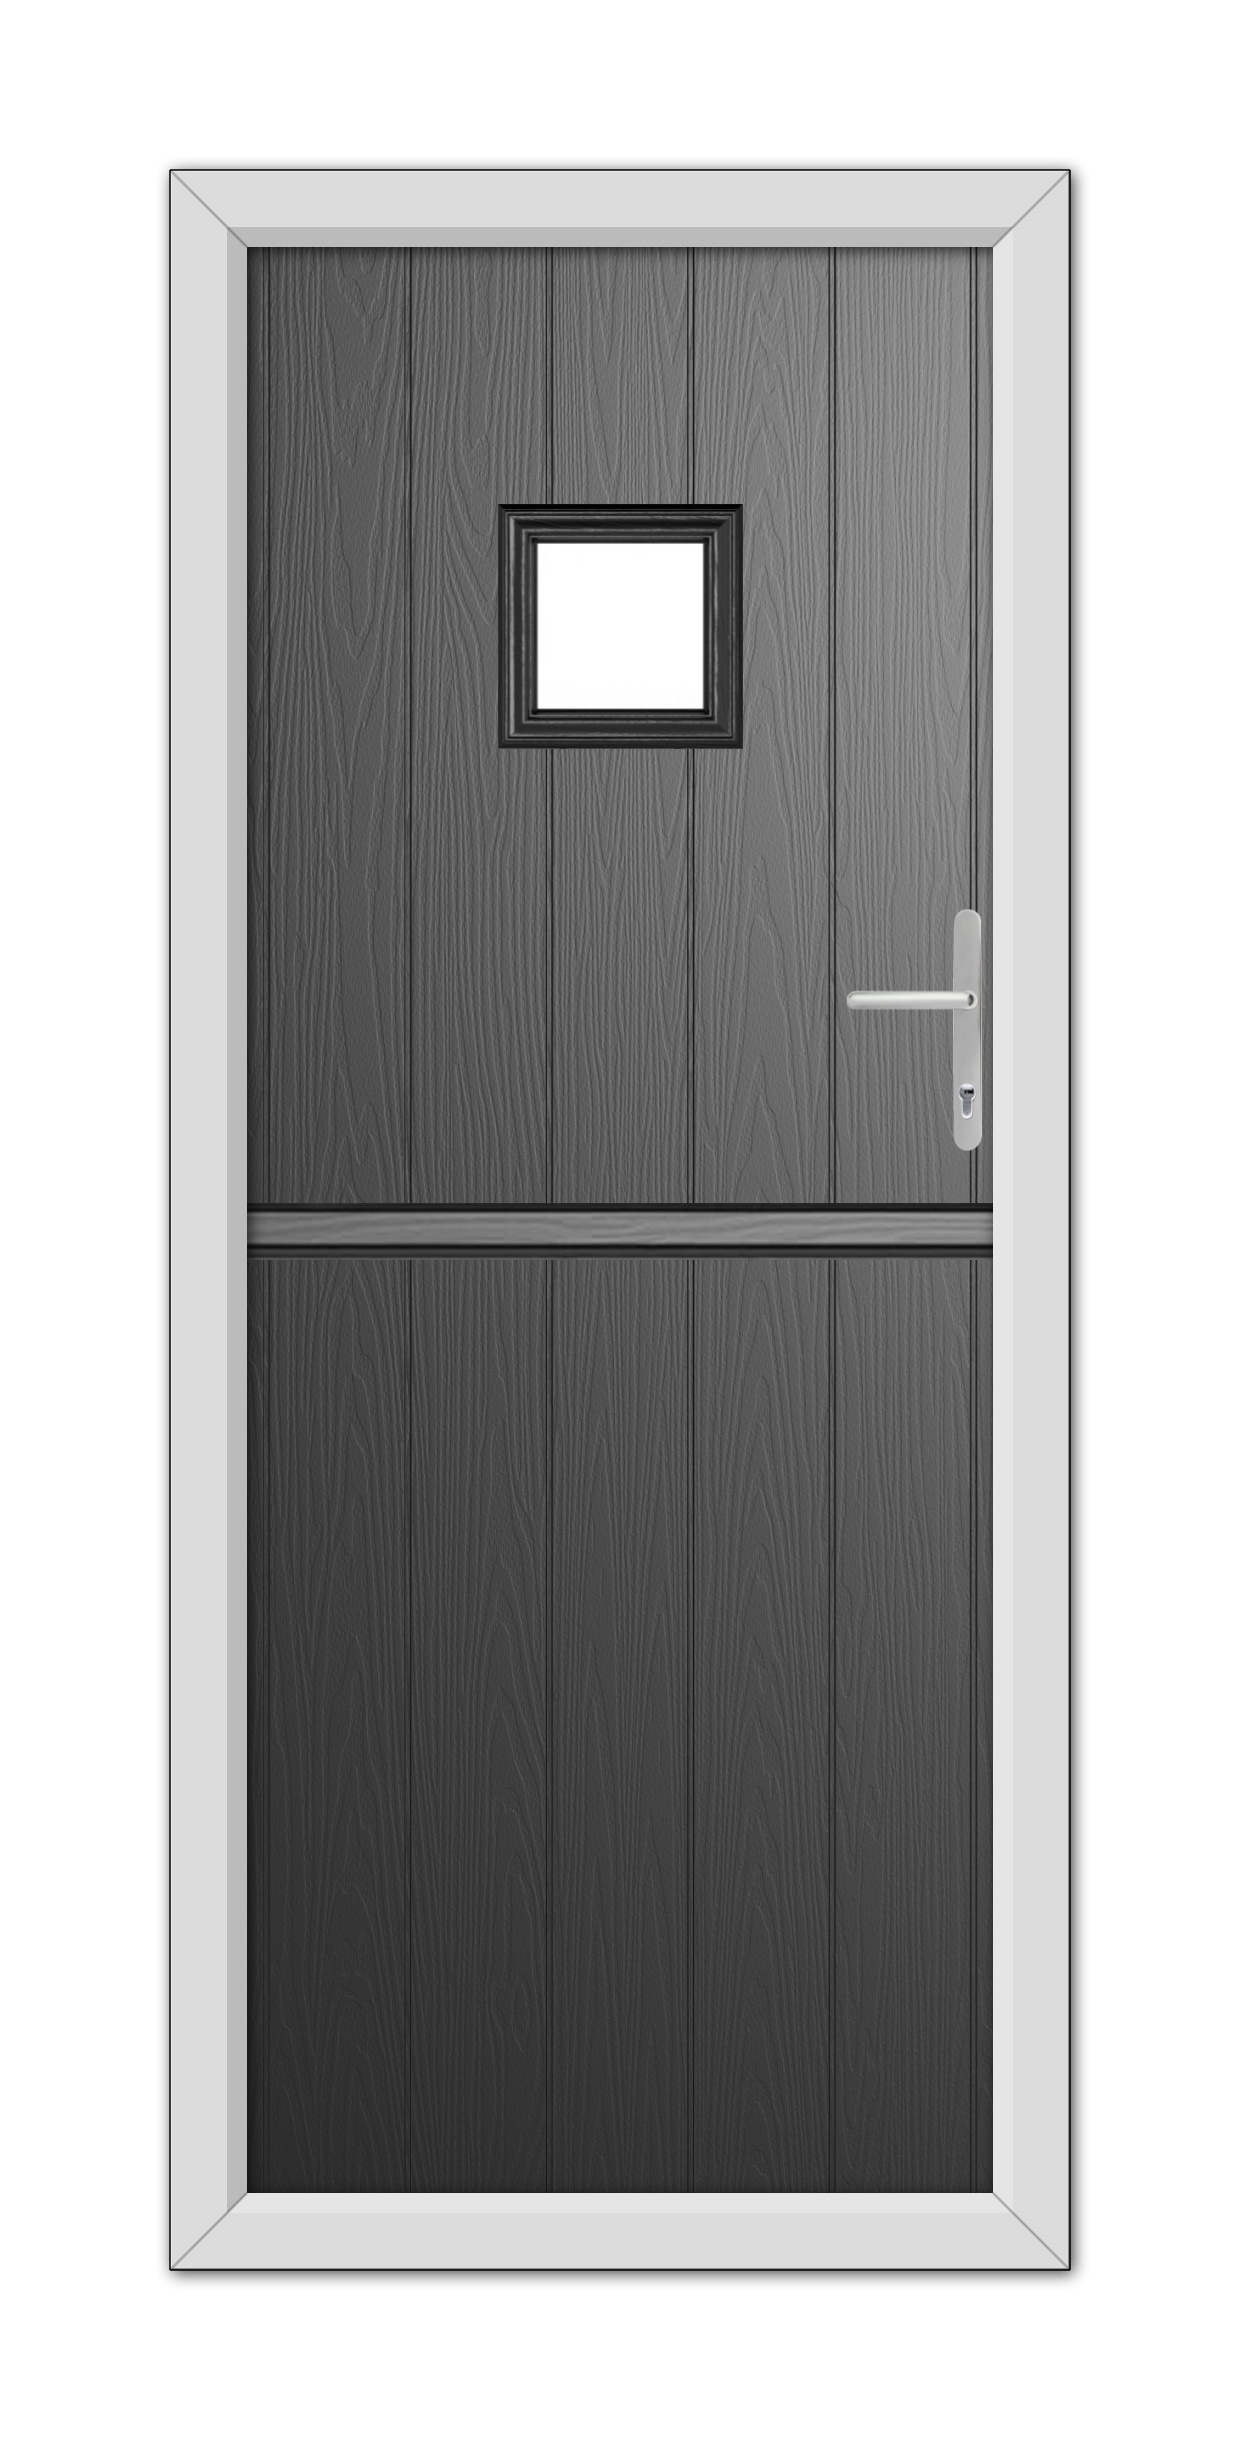 A modern, Black Brampton Stable Composite Door 48mm Timber Core with a small square window, located in a white frame.